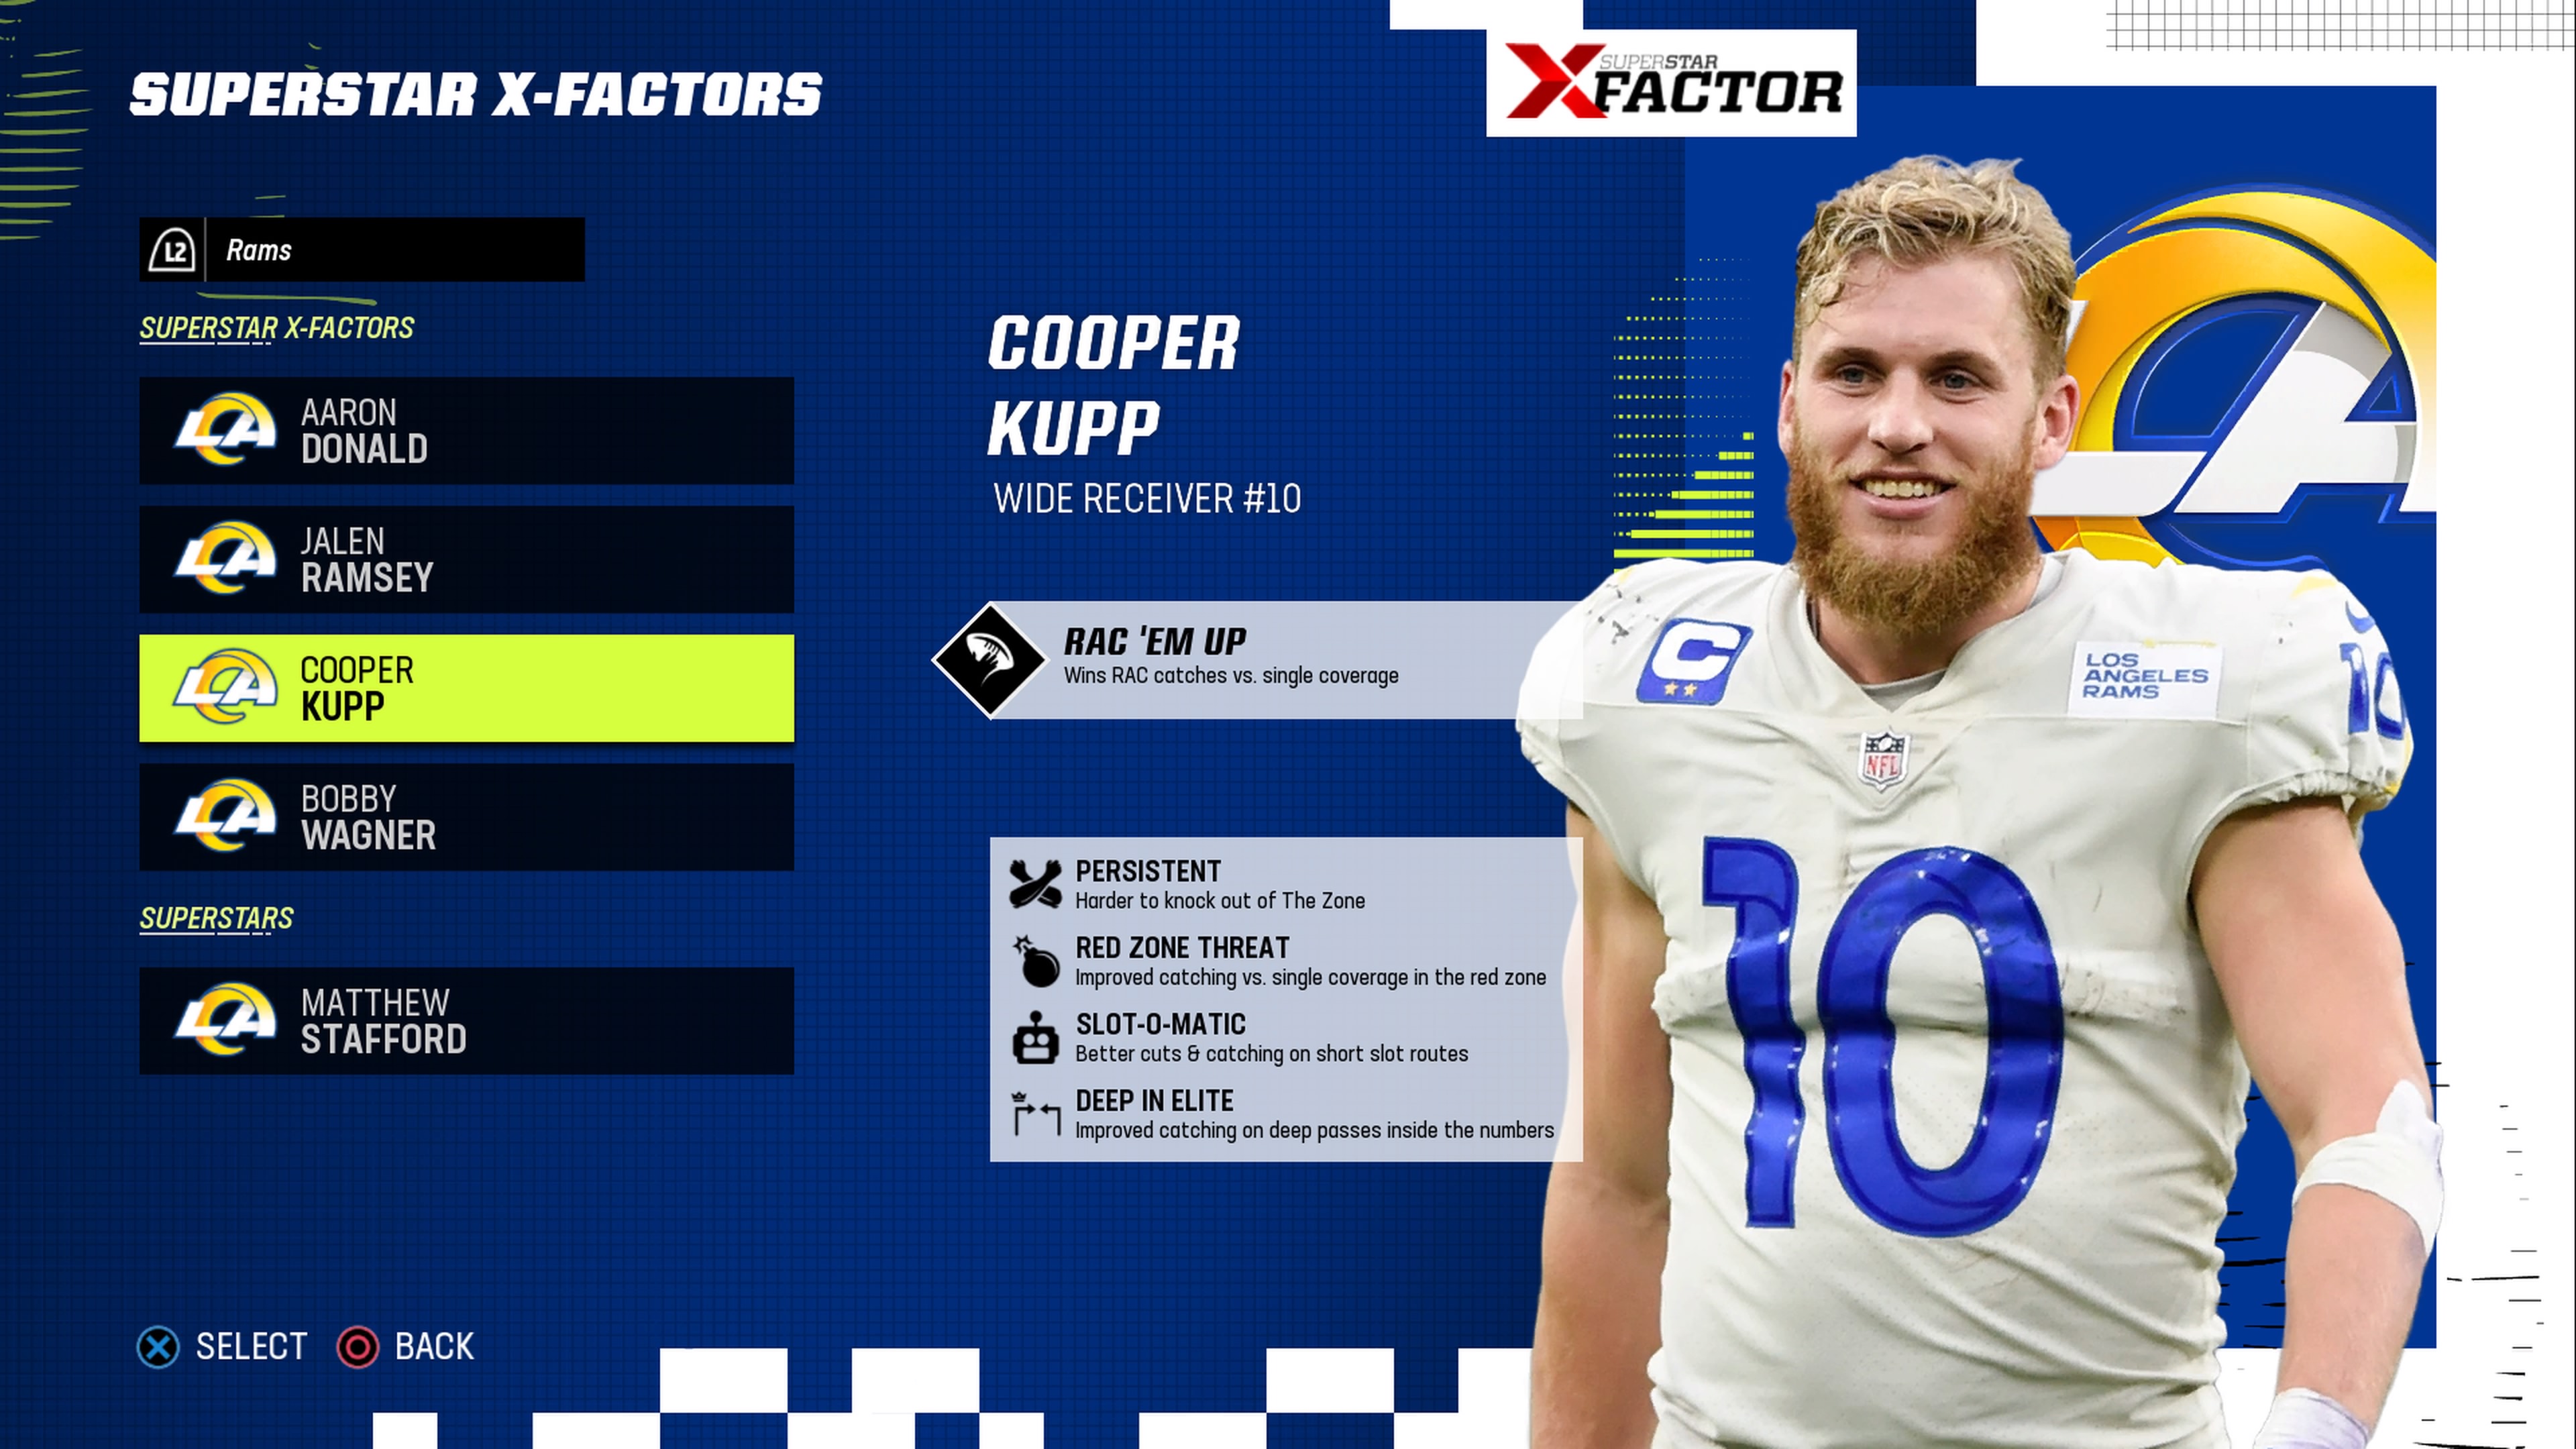 All the Madden 23 X-Factors and Superstars in one place